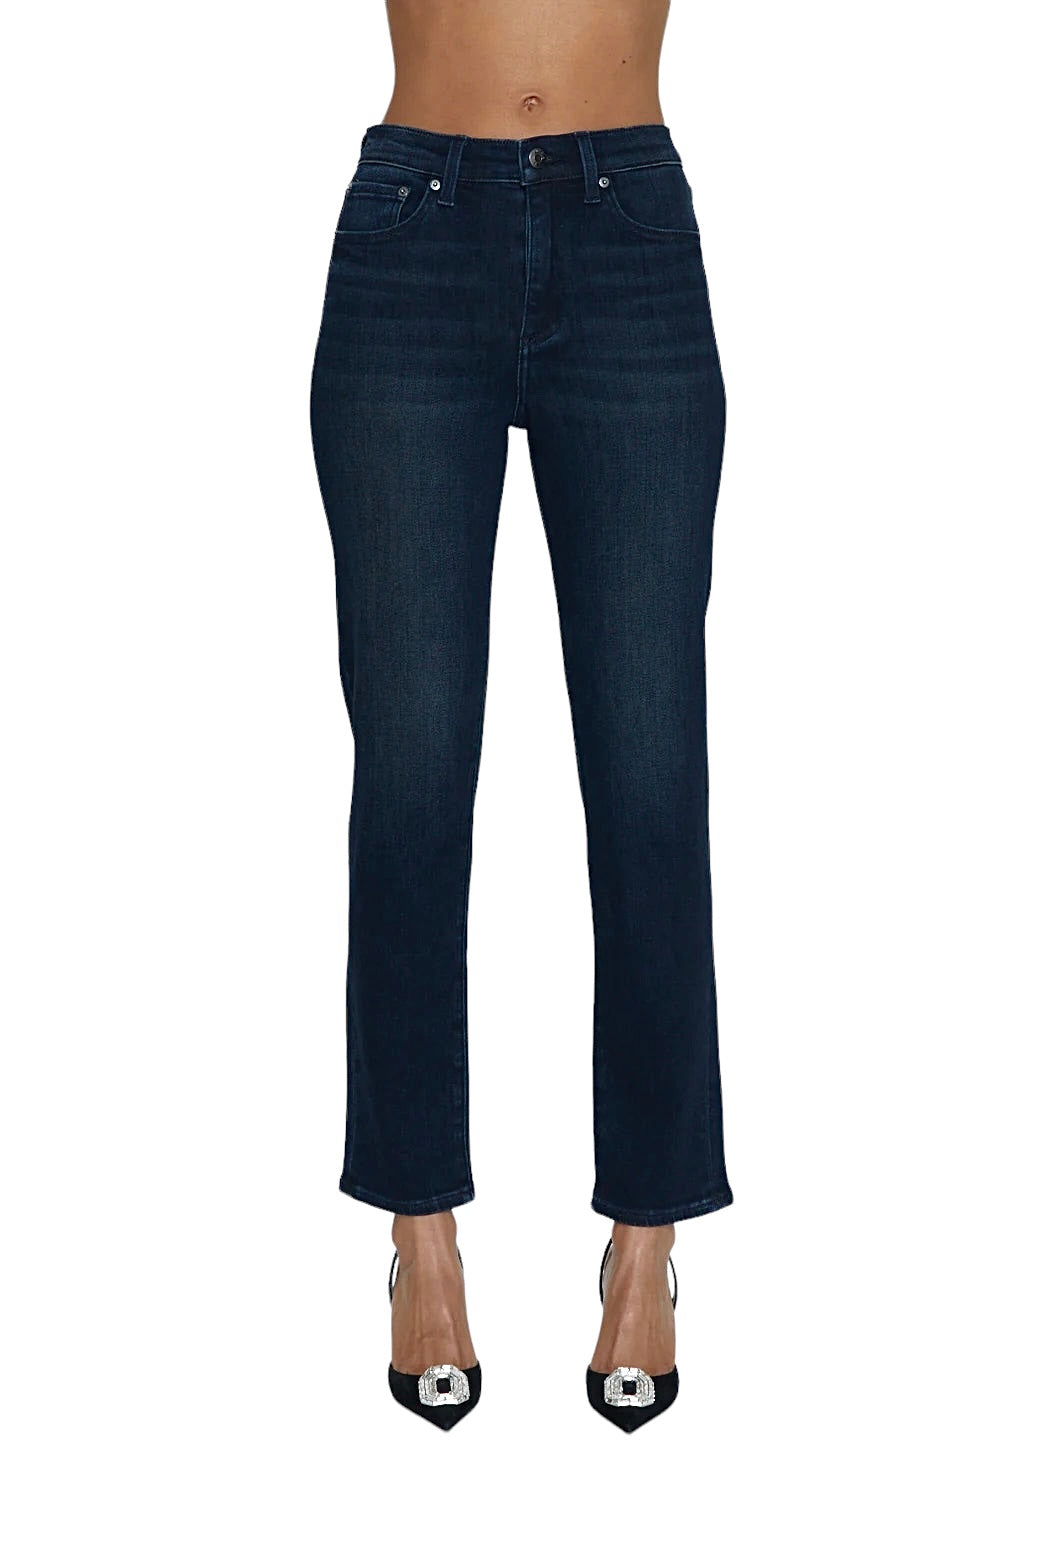 Madi High Rise Modern Slim in iconic by Pistola